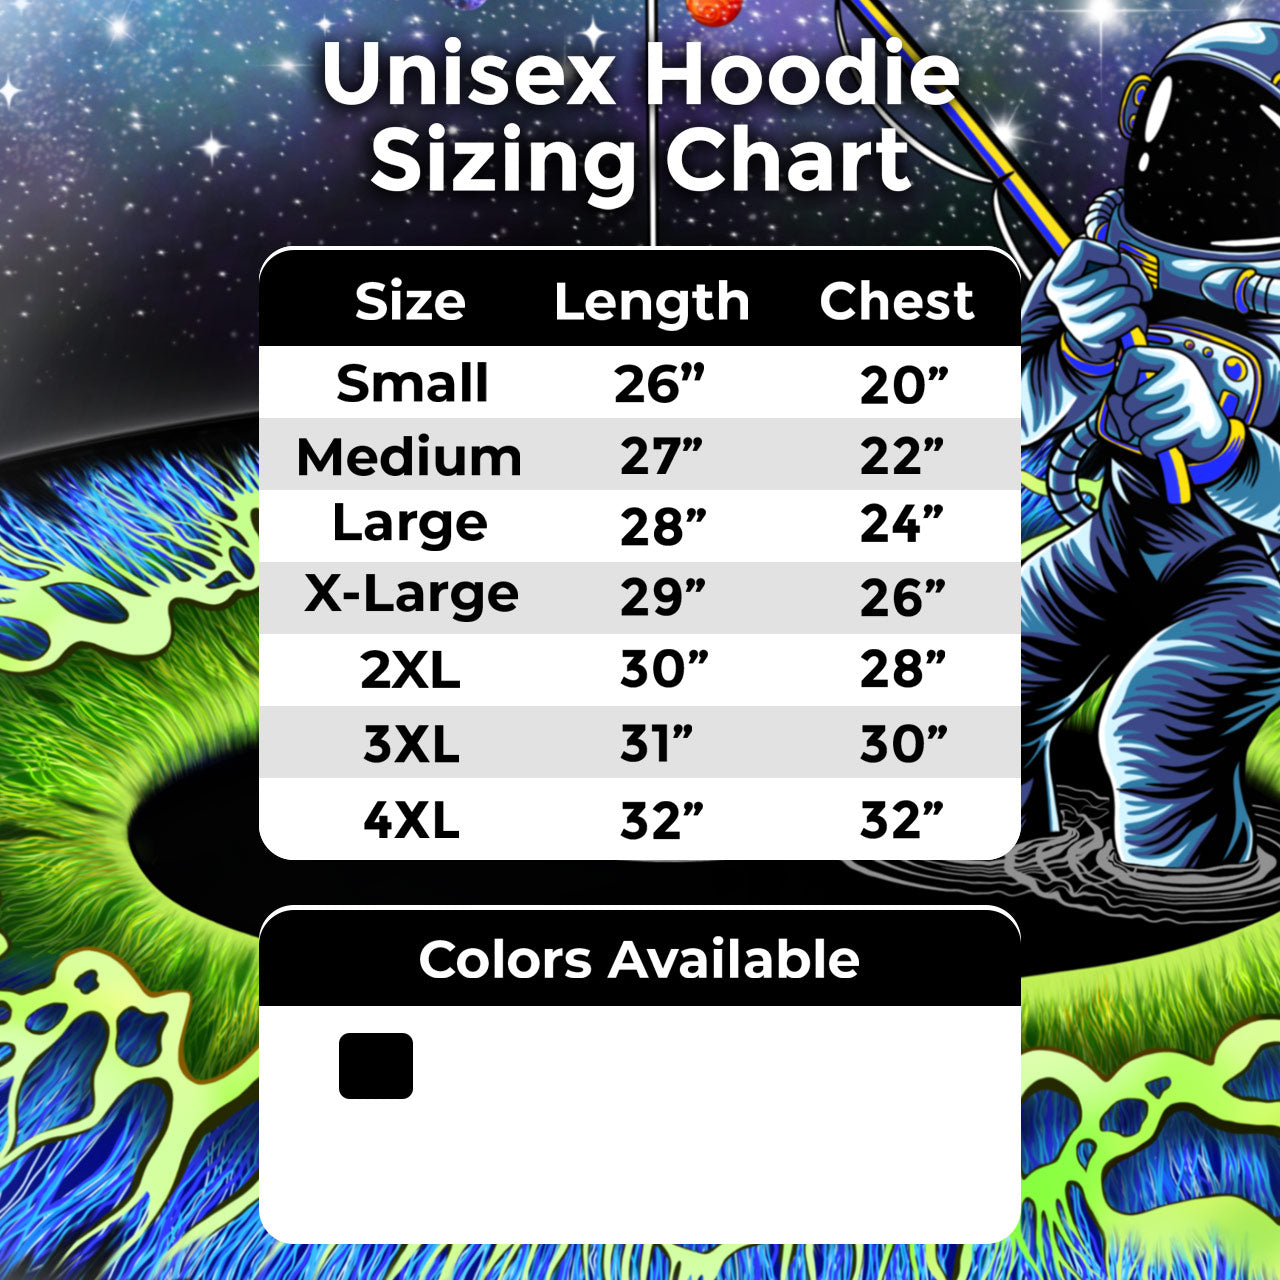 Tripping on Space Mushrooms |Shroomaniac| Psychedelic and Psytrance Mushroom Hoodie